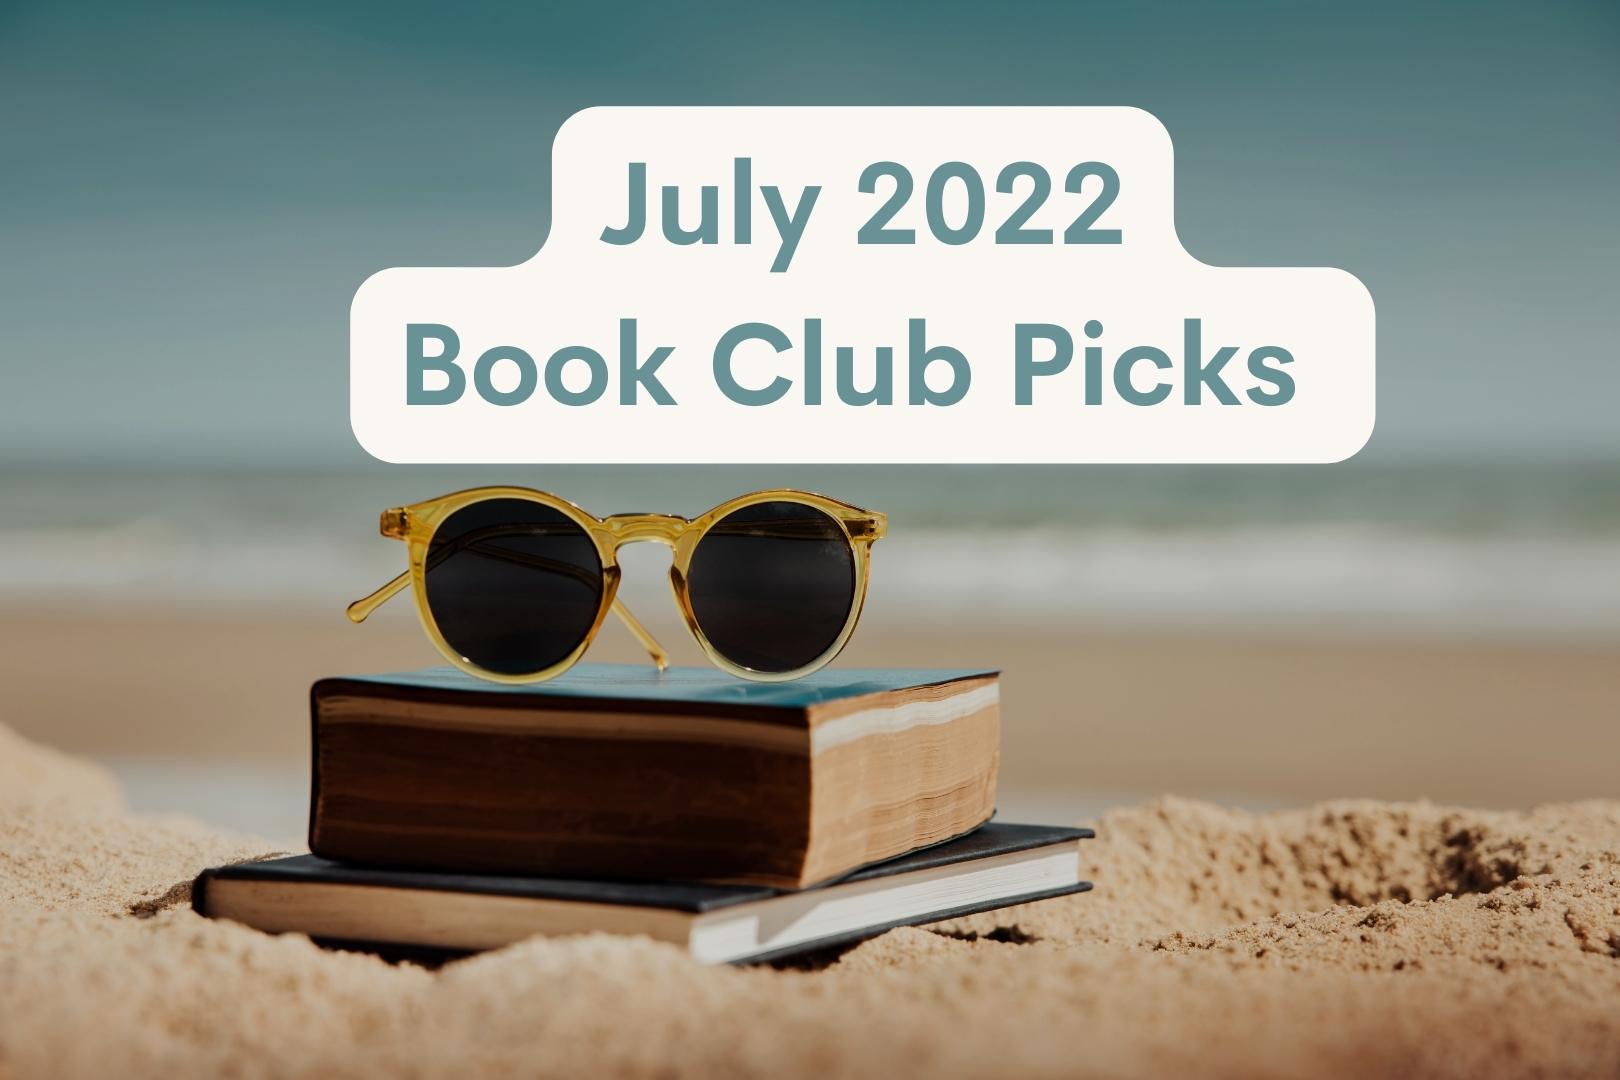 Book Club Picks for July 2022